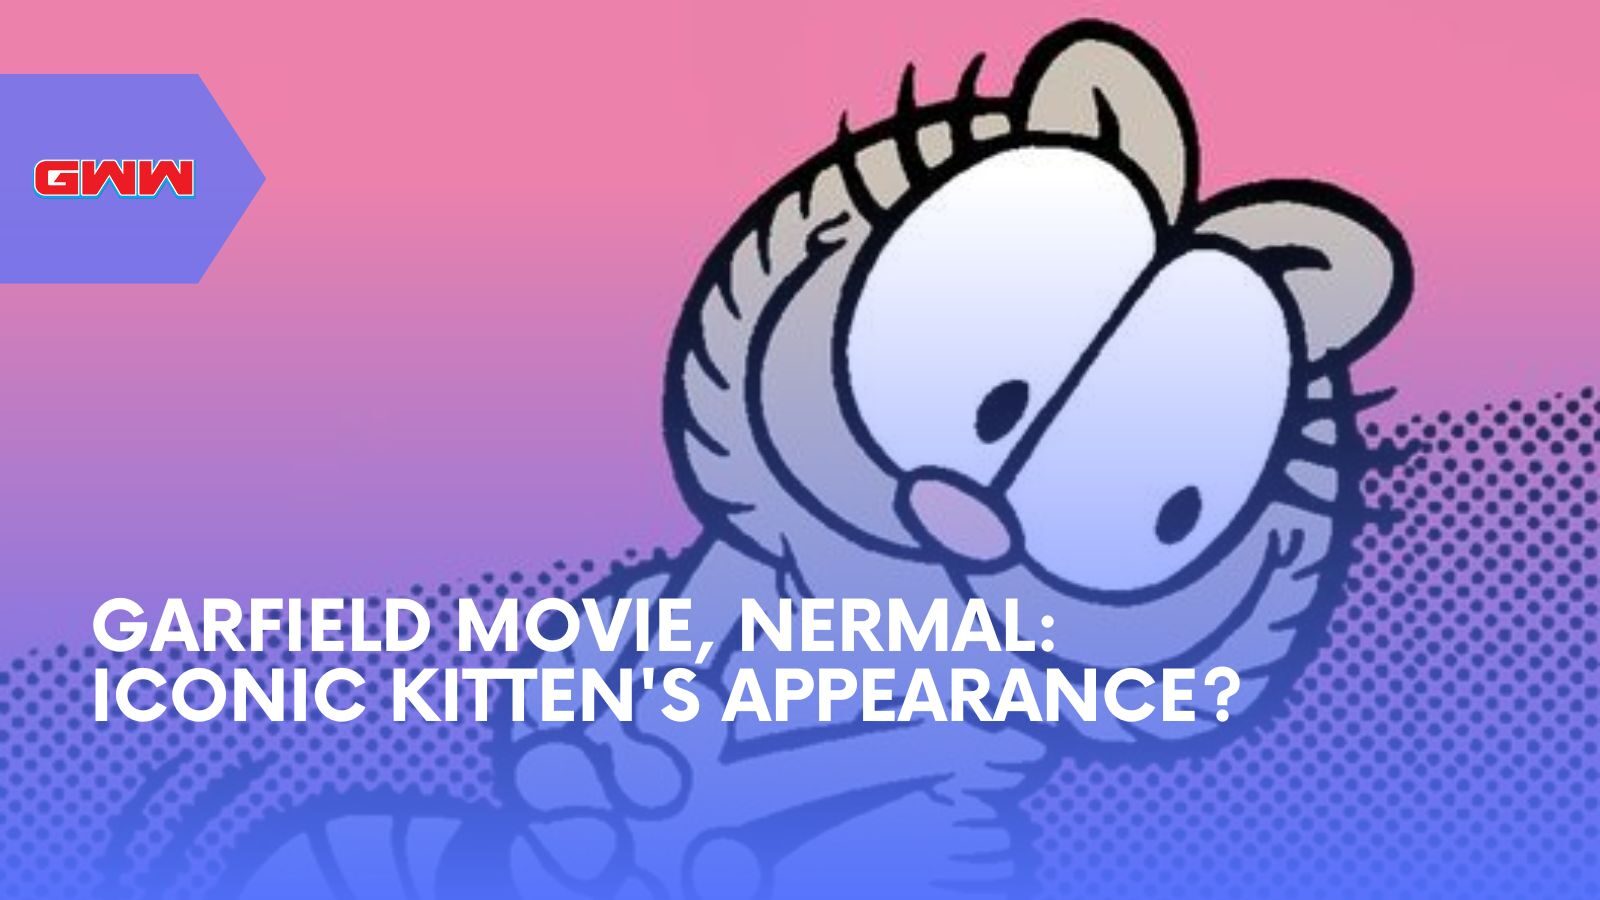 Garfield The Movie, Nermal: Iconic Kitten's Appearance?